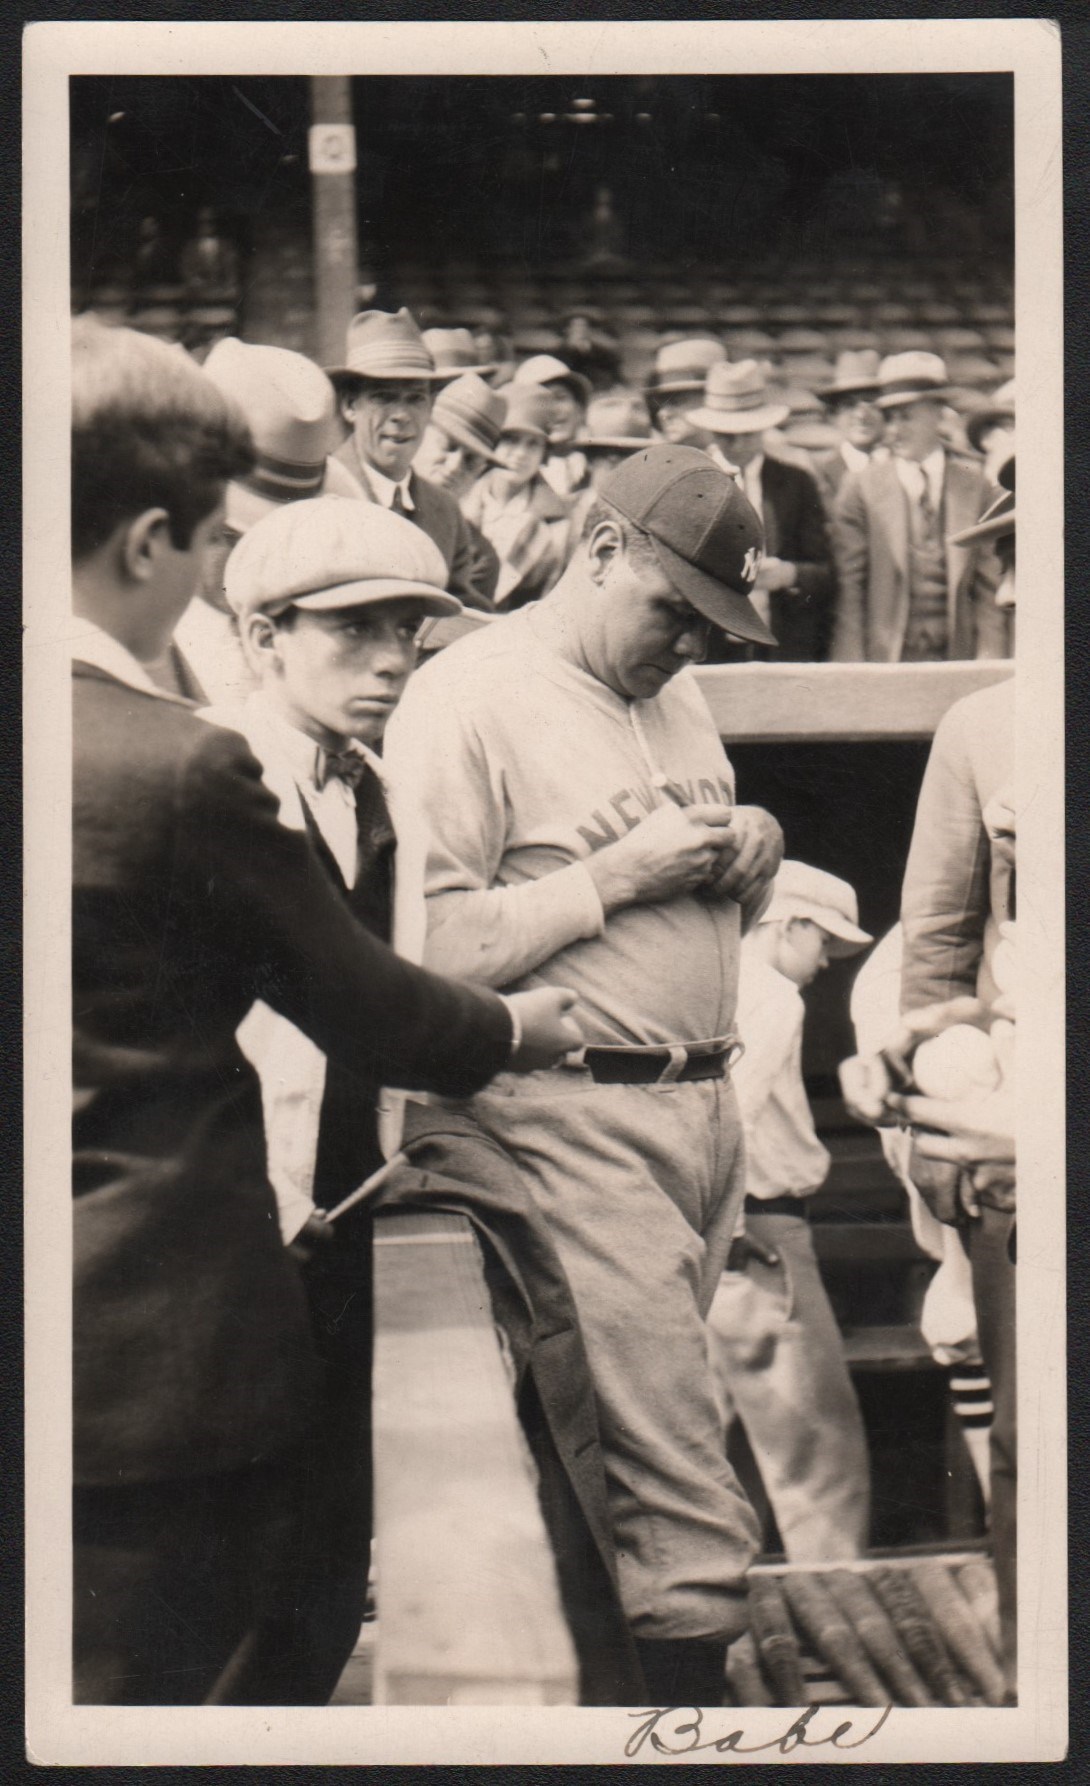 - 1926 World Series Snapshots with Babe Ruth Signing Ball & Rogers Hornsby (10)